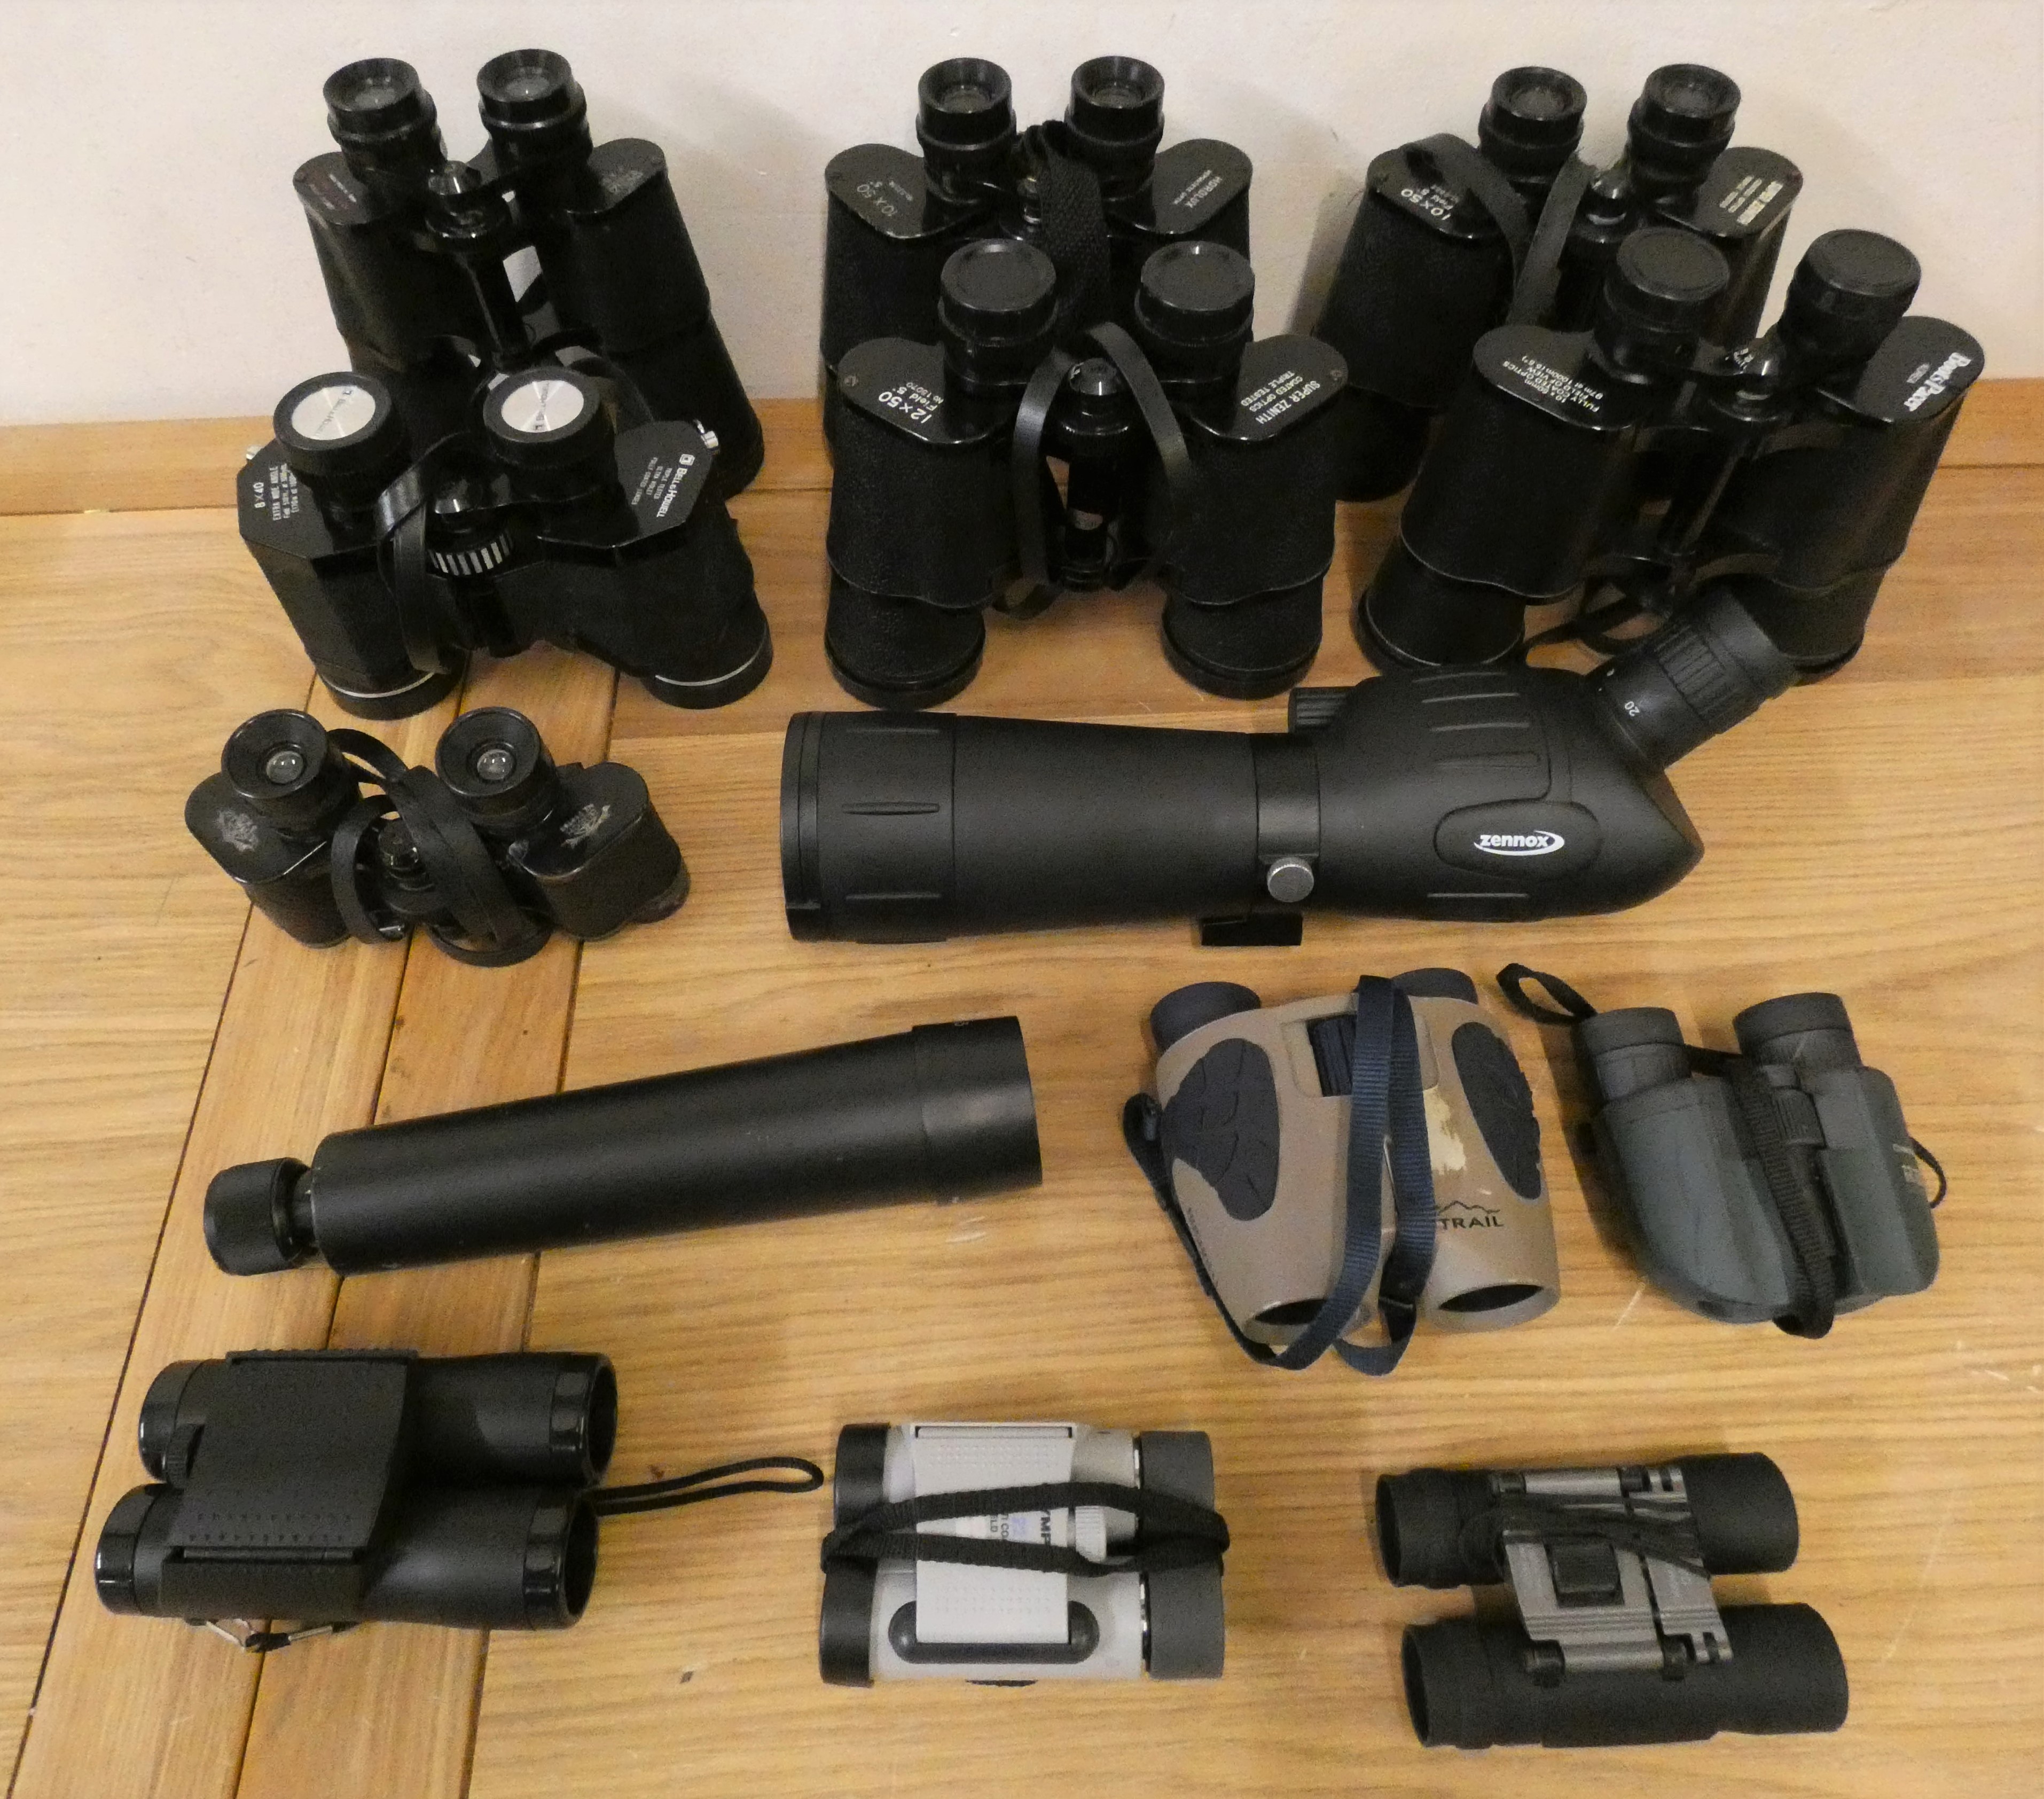 Twelve pairs of binoculars, to include Bell & Howell, Horolux, Zenith and two monocular's.